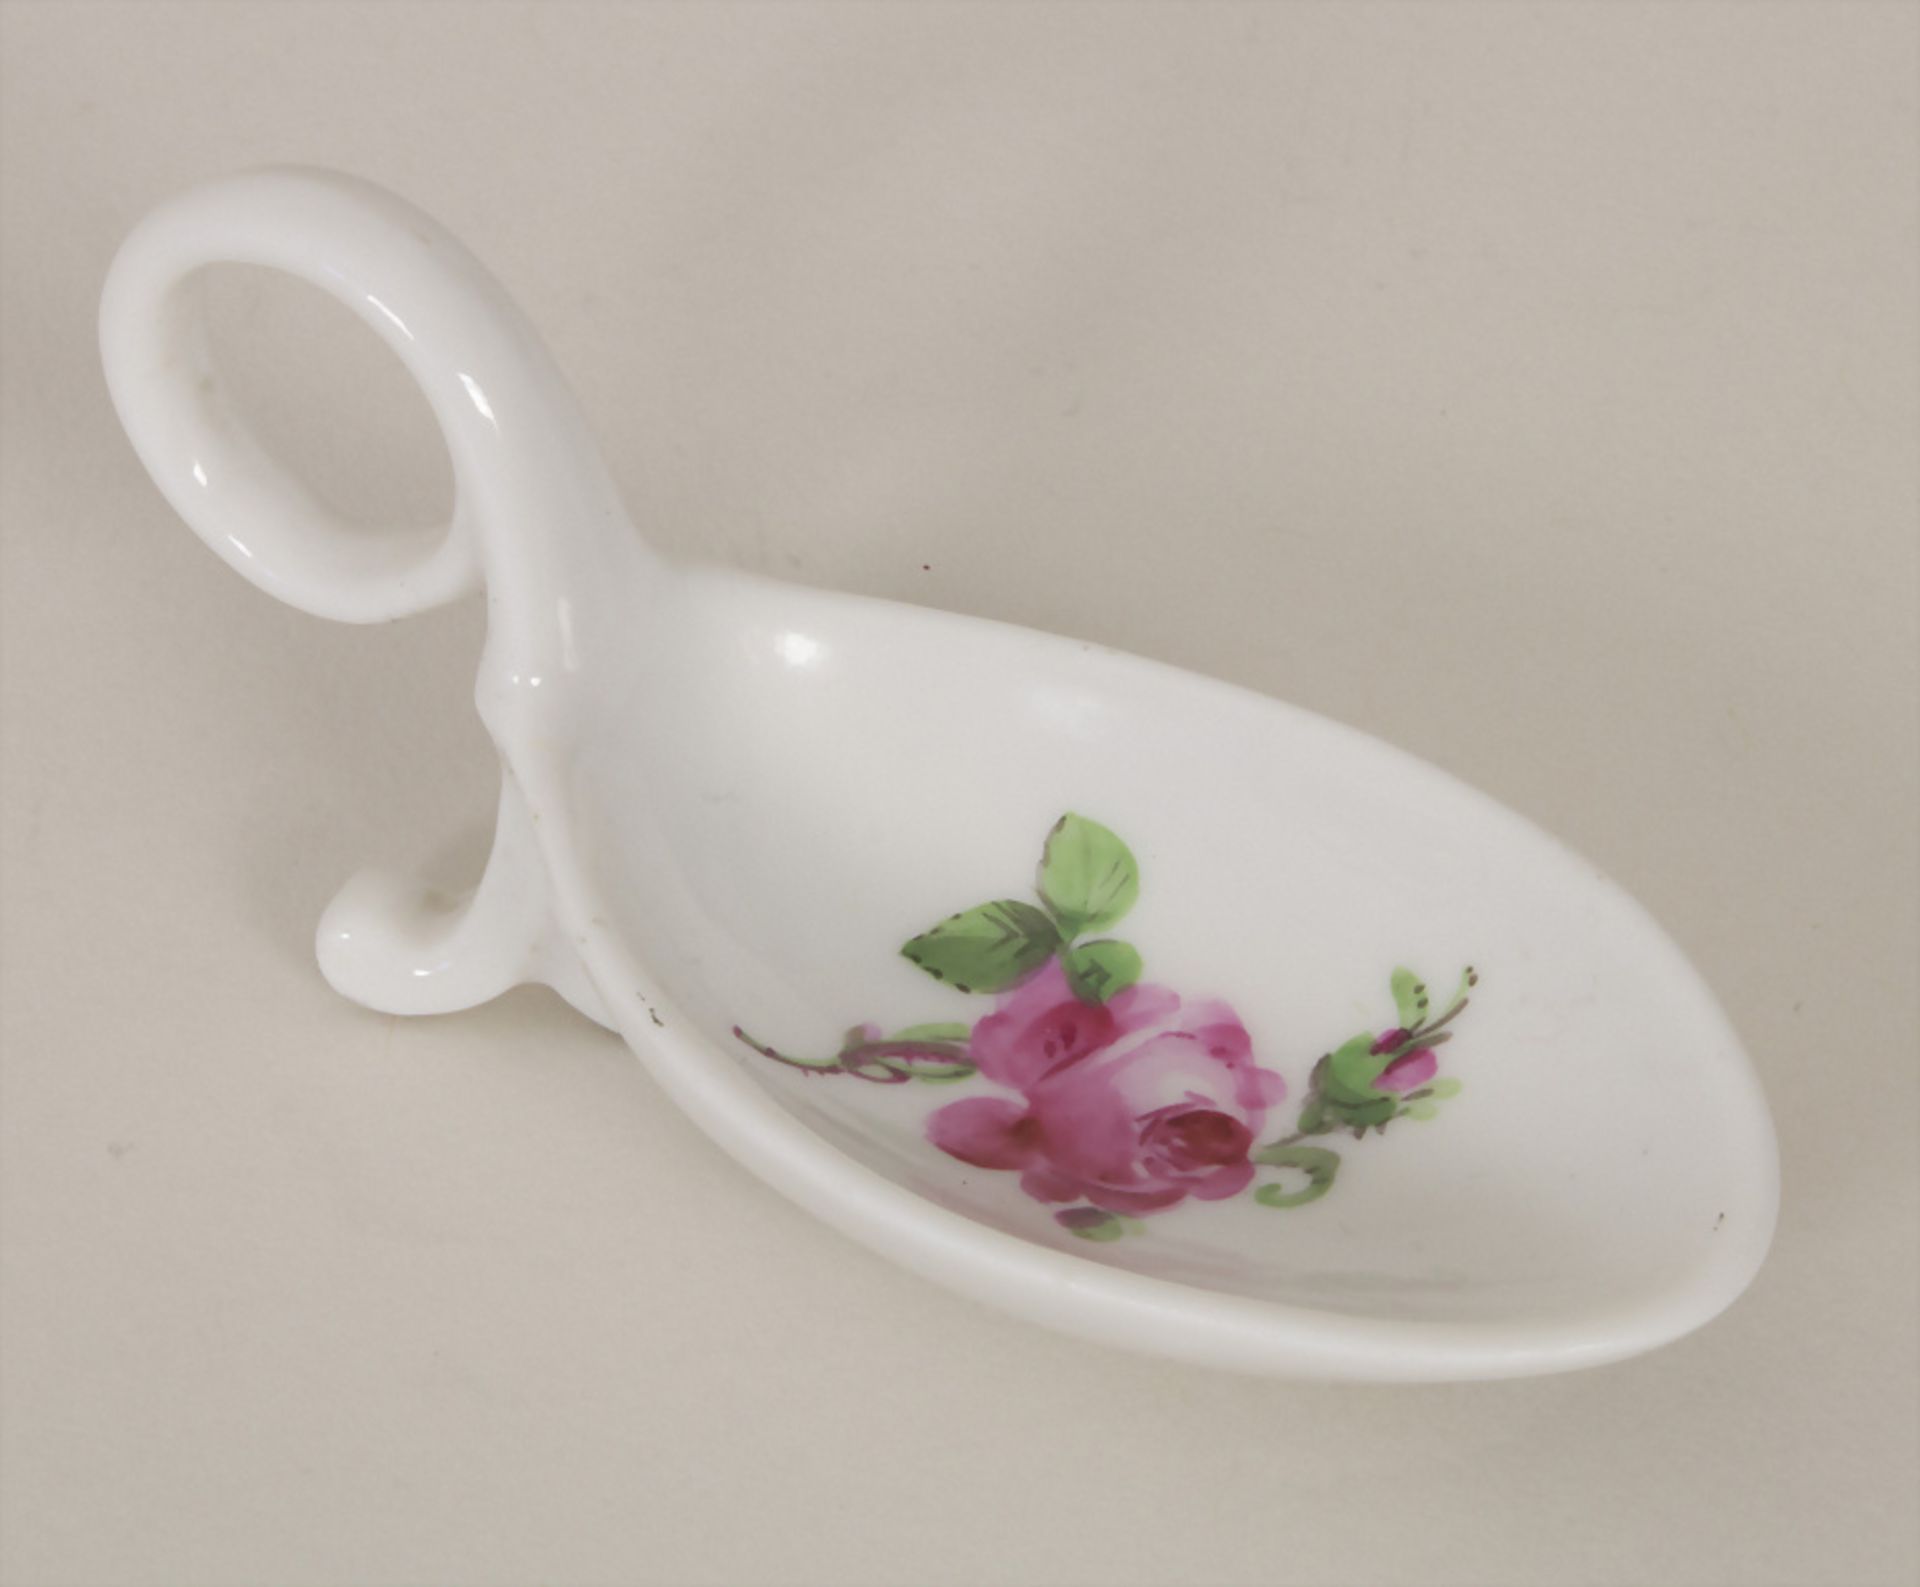 Seltener Löffel 'Rote Rose' / A rare spoon with rose pattern, Meissen, Mitte 19. Jh.